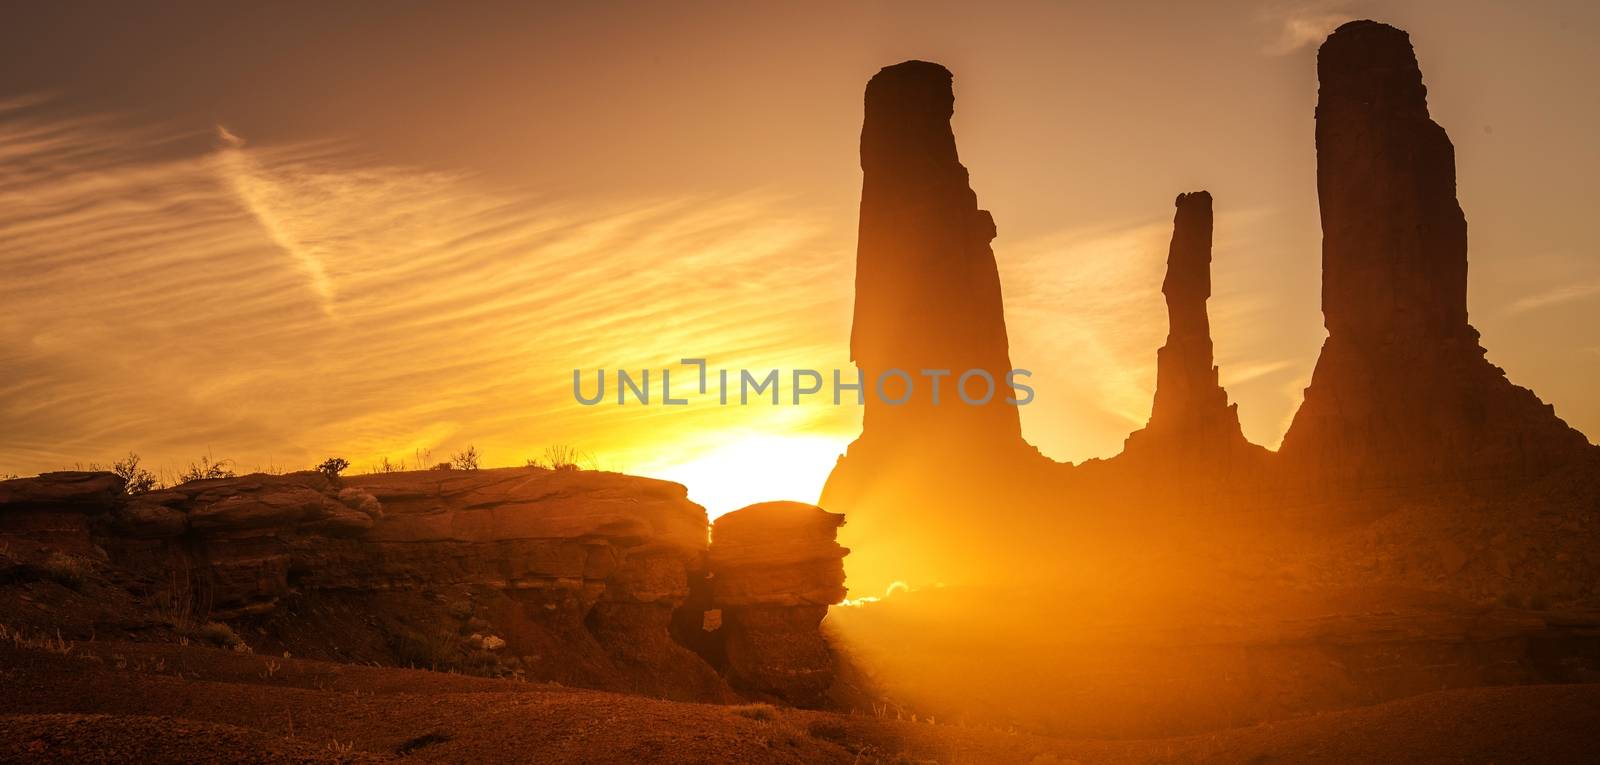 Raw Arizona Sunset. Scenic Sunlight in the Monuments Valley, United States. Rocky Sandstone Formations. Panoramic Photo.